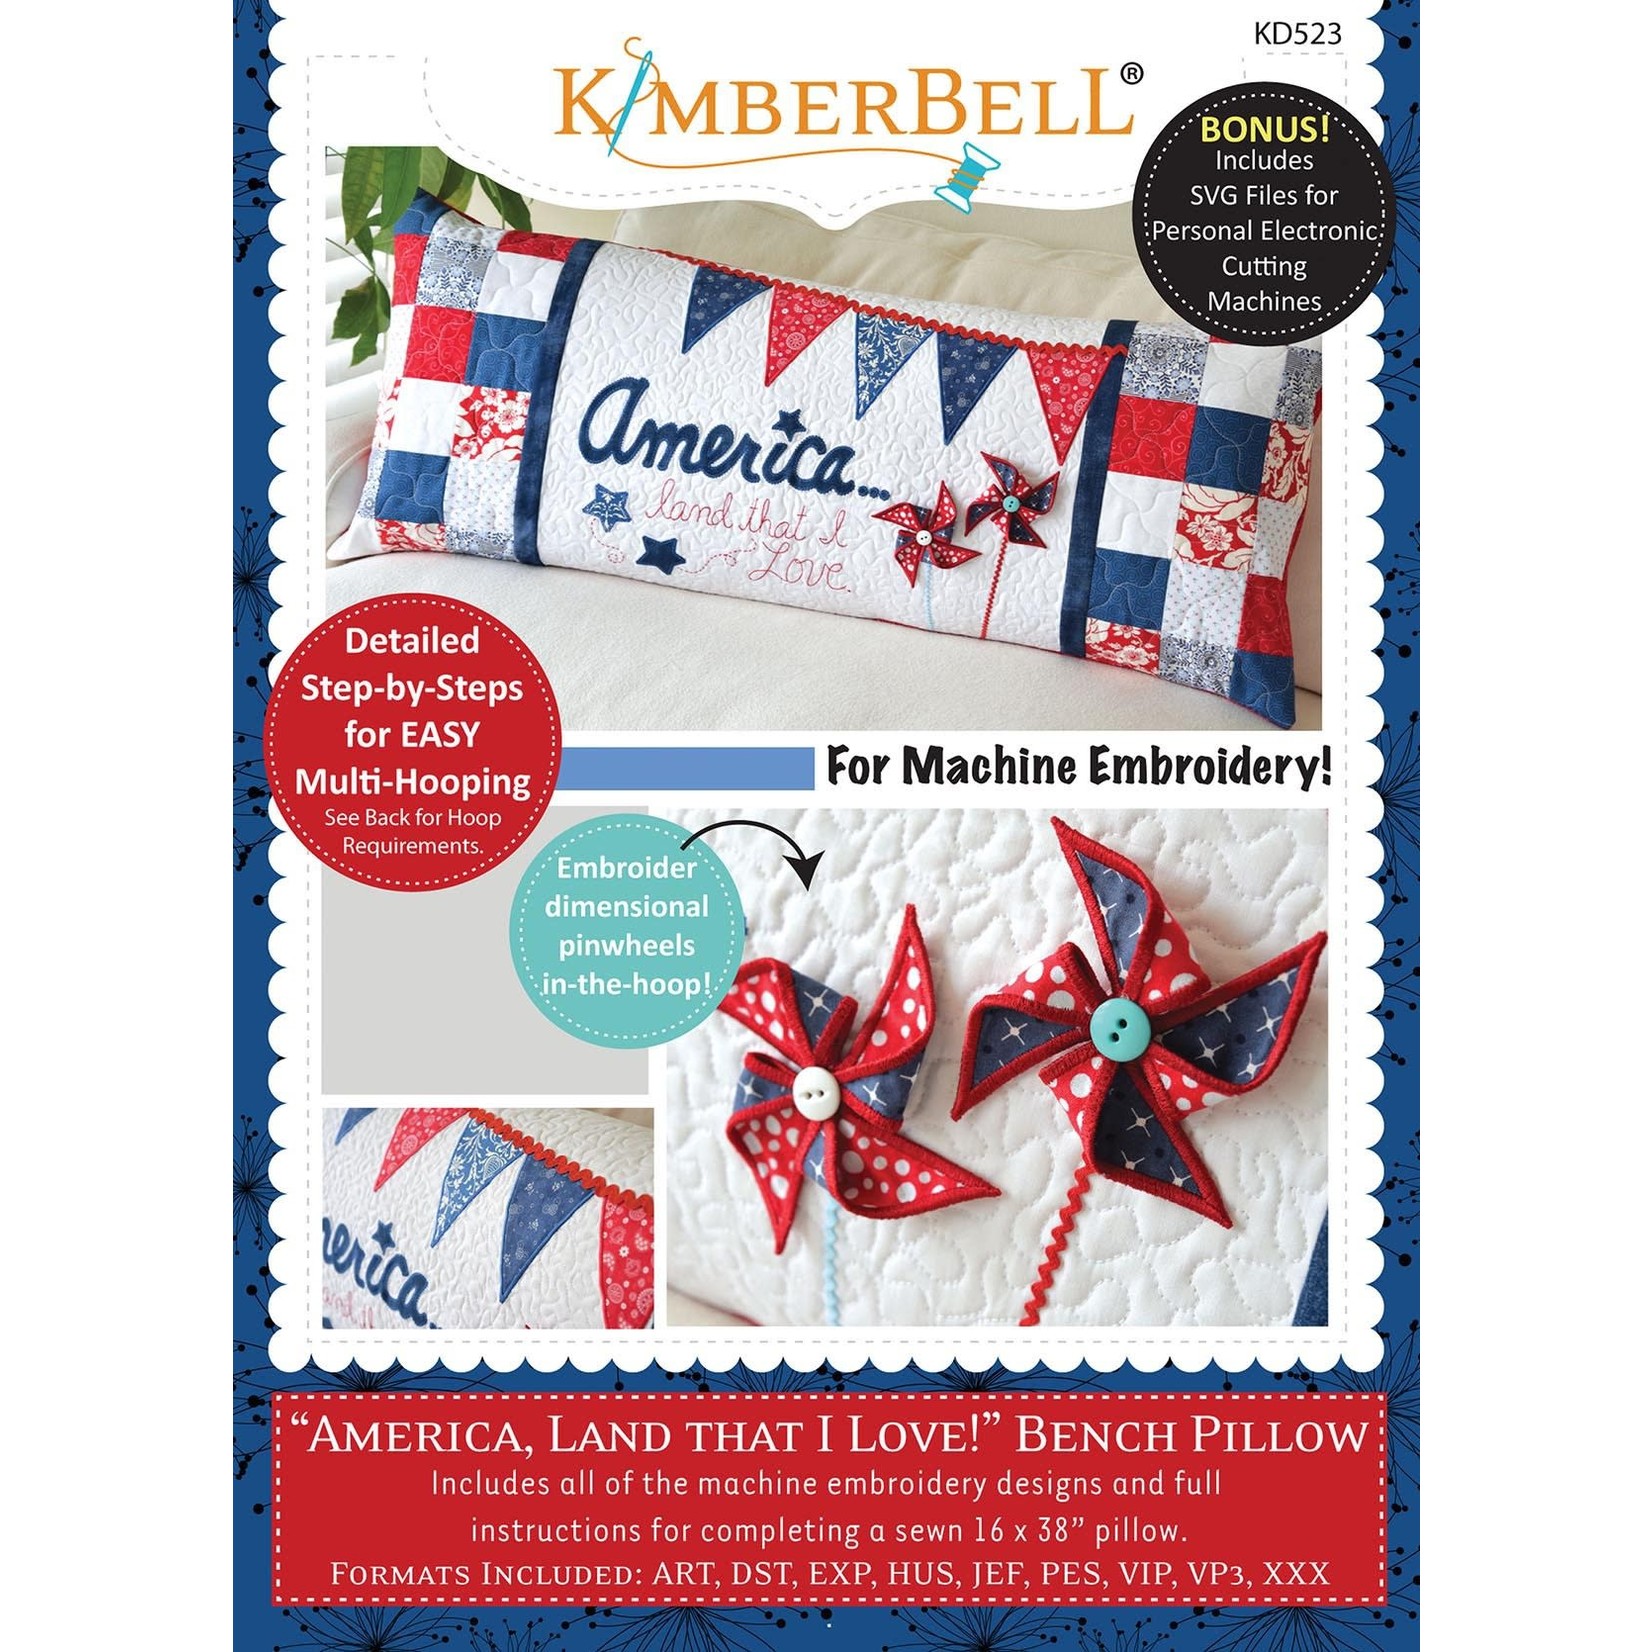 Kimberbell Designs America, Land that I Love! Bench Pillow Machine Embroidery CD